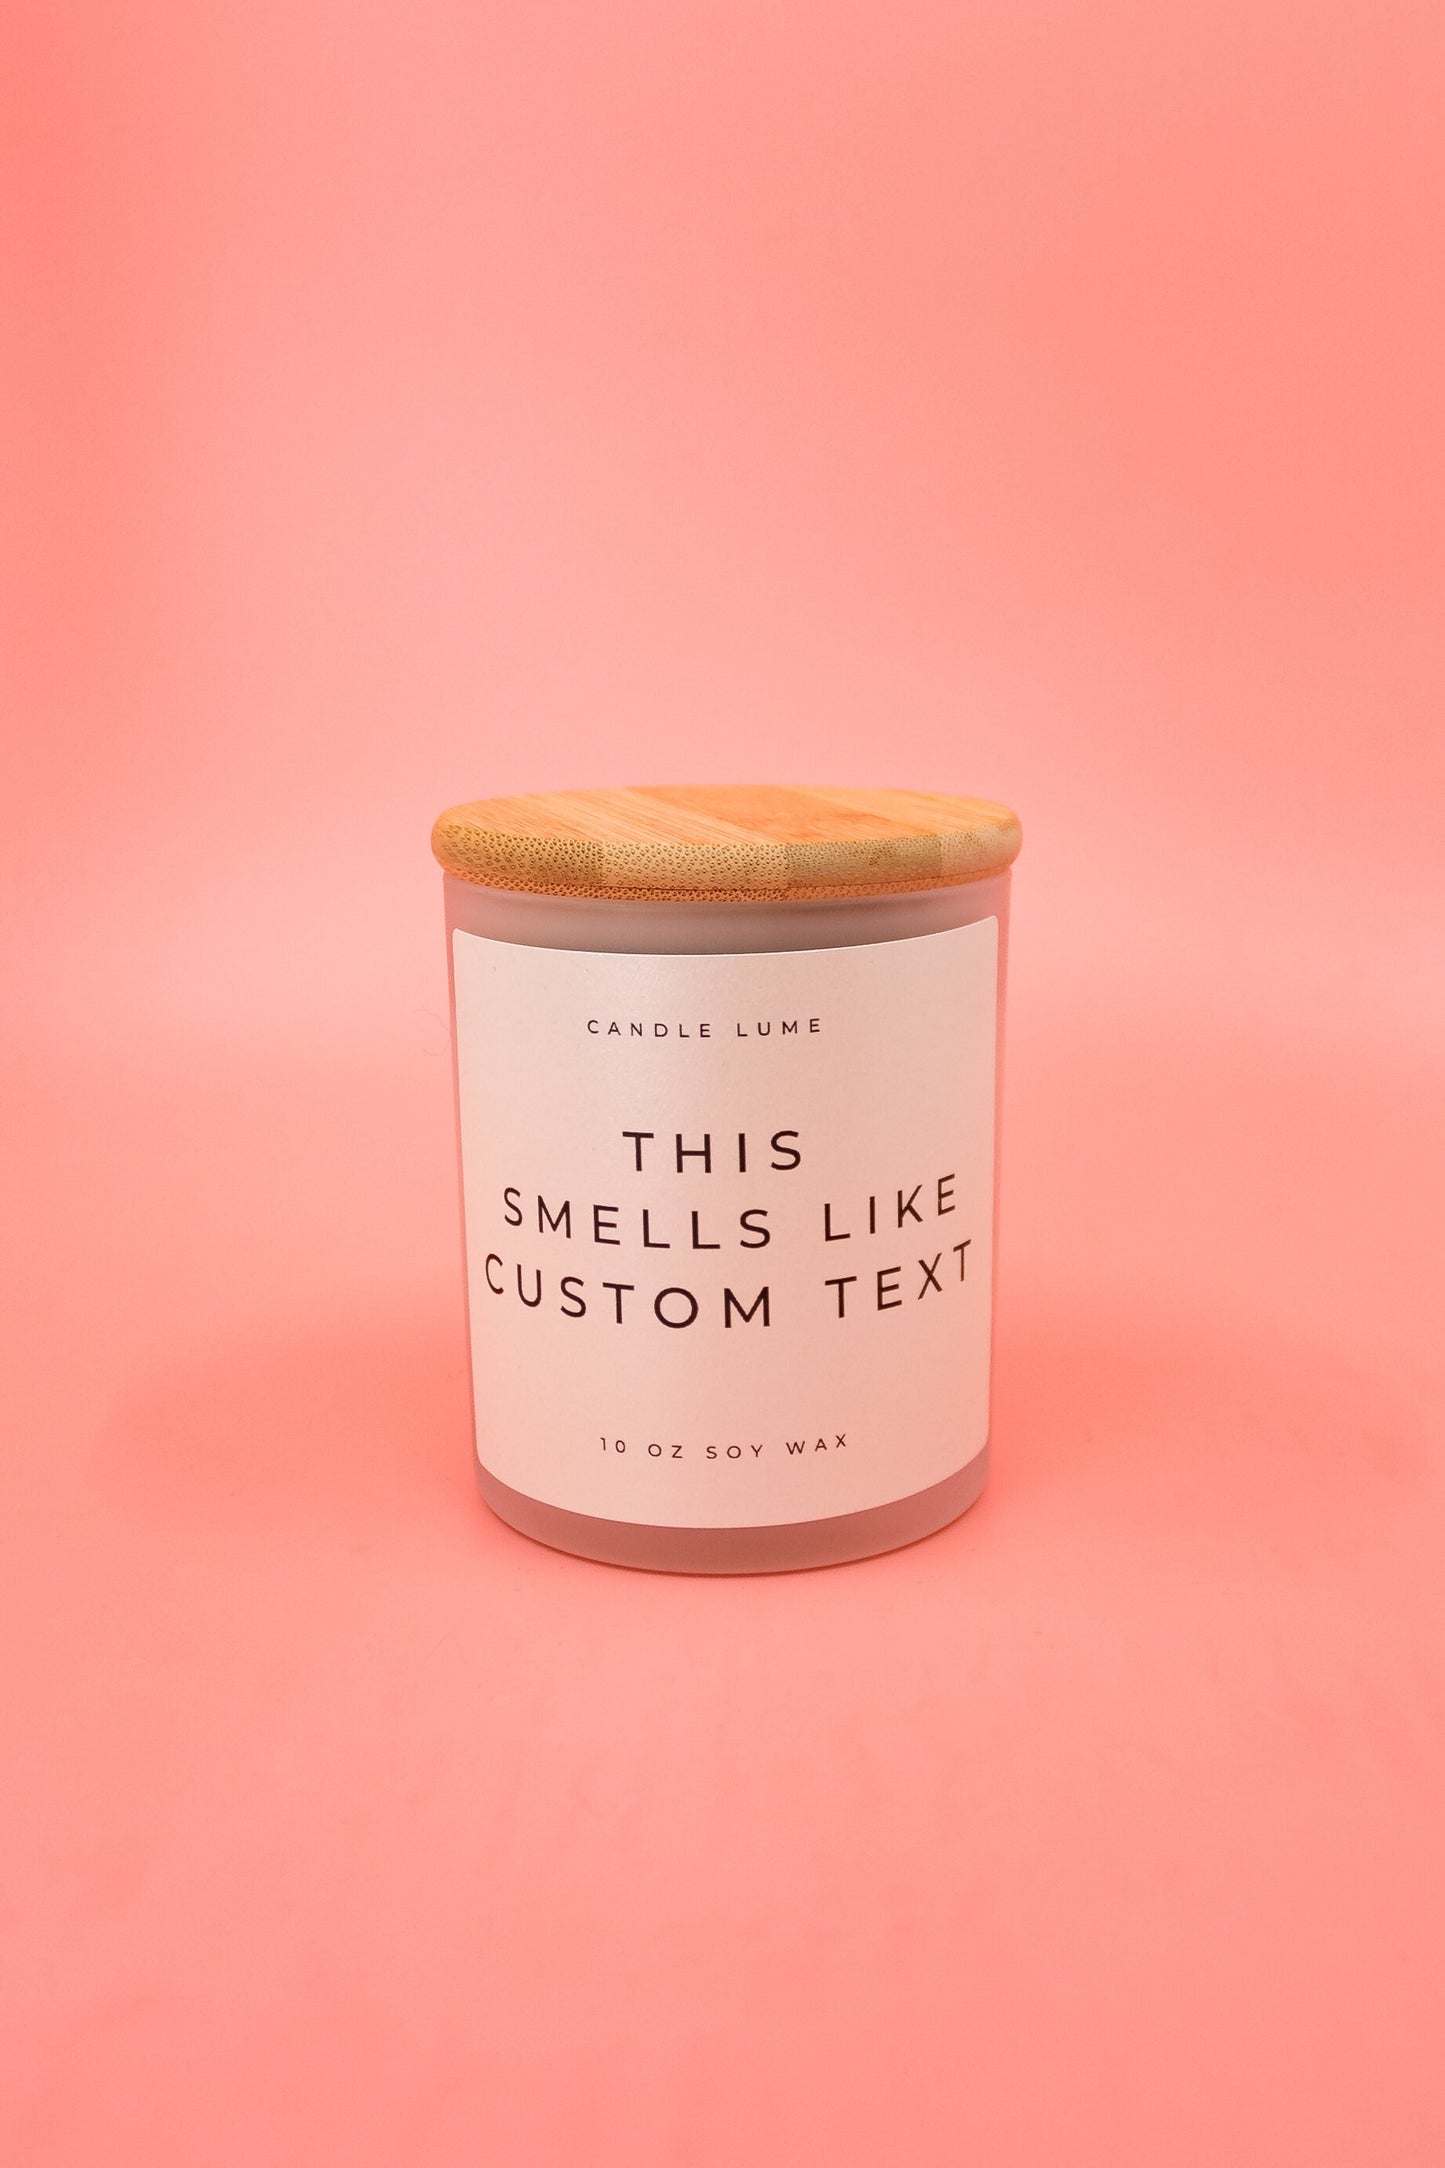 This Candle Smells Like Custom Candle